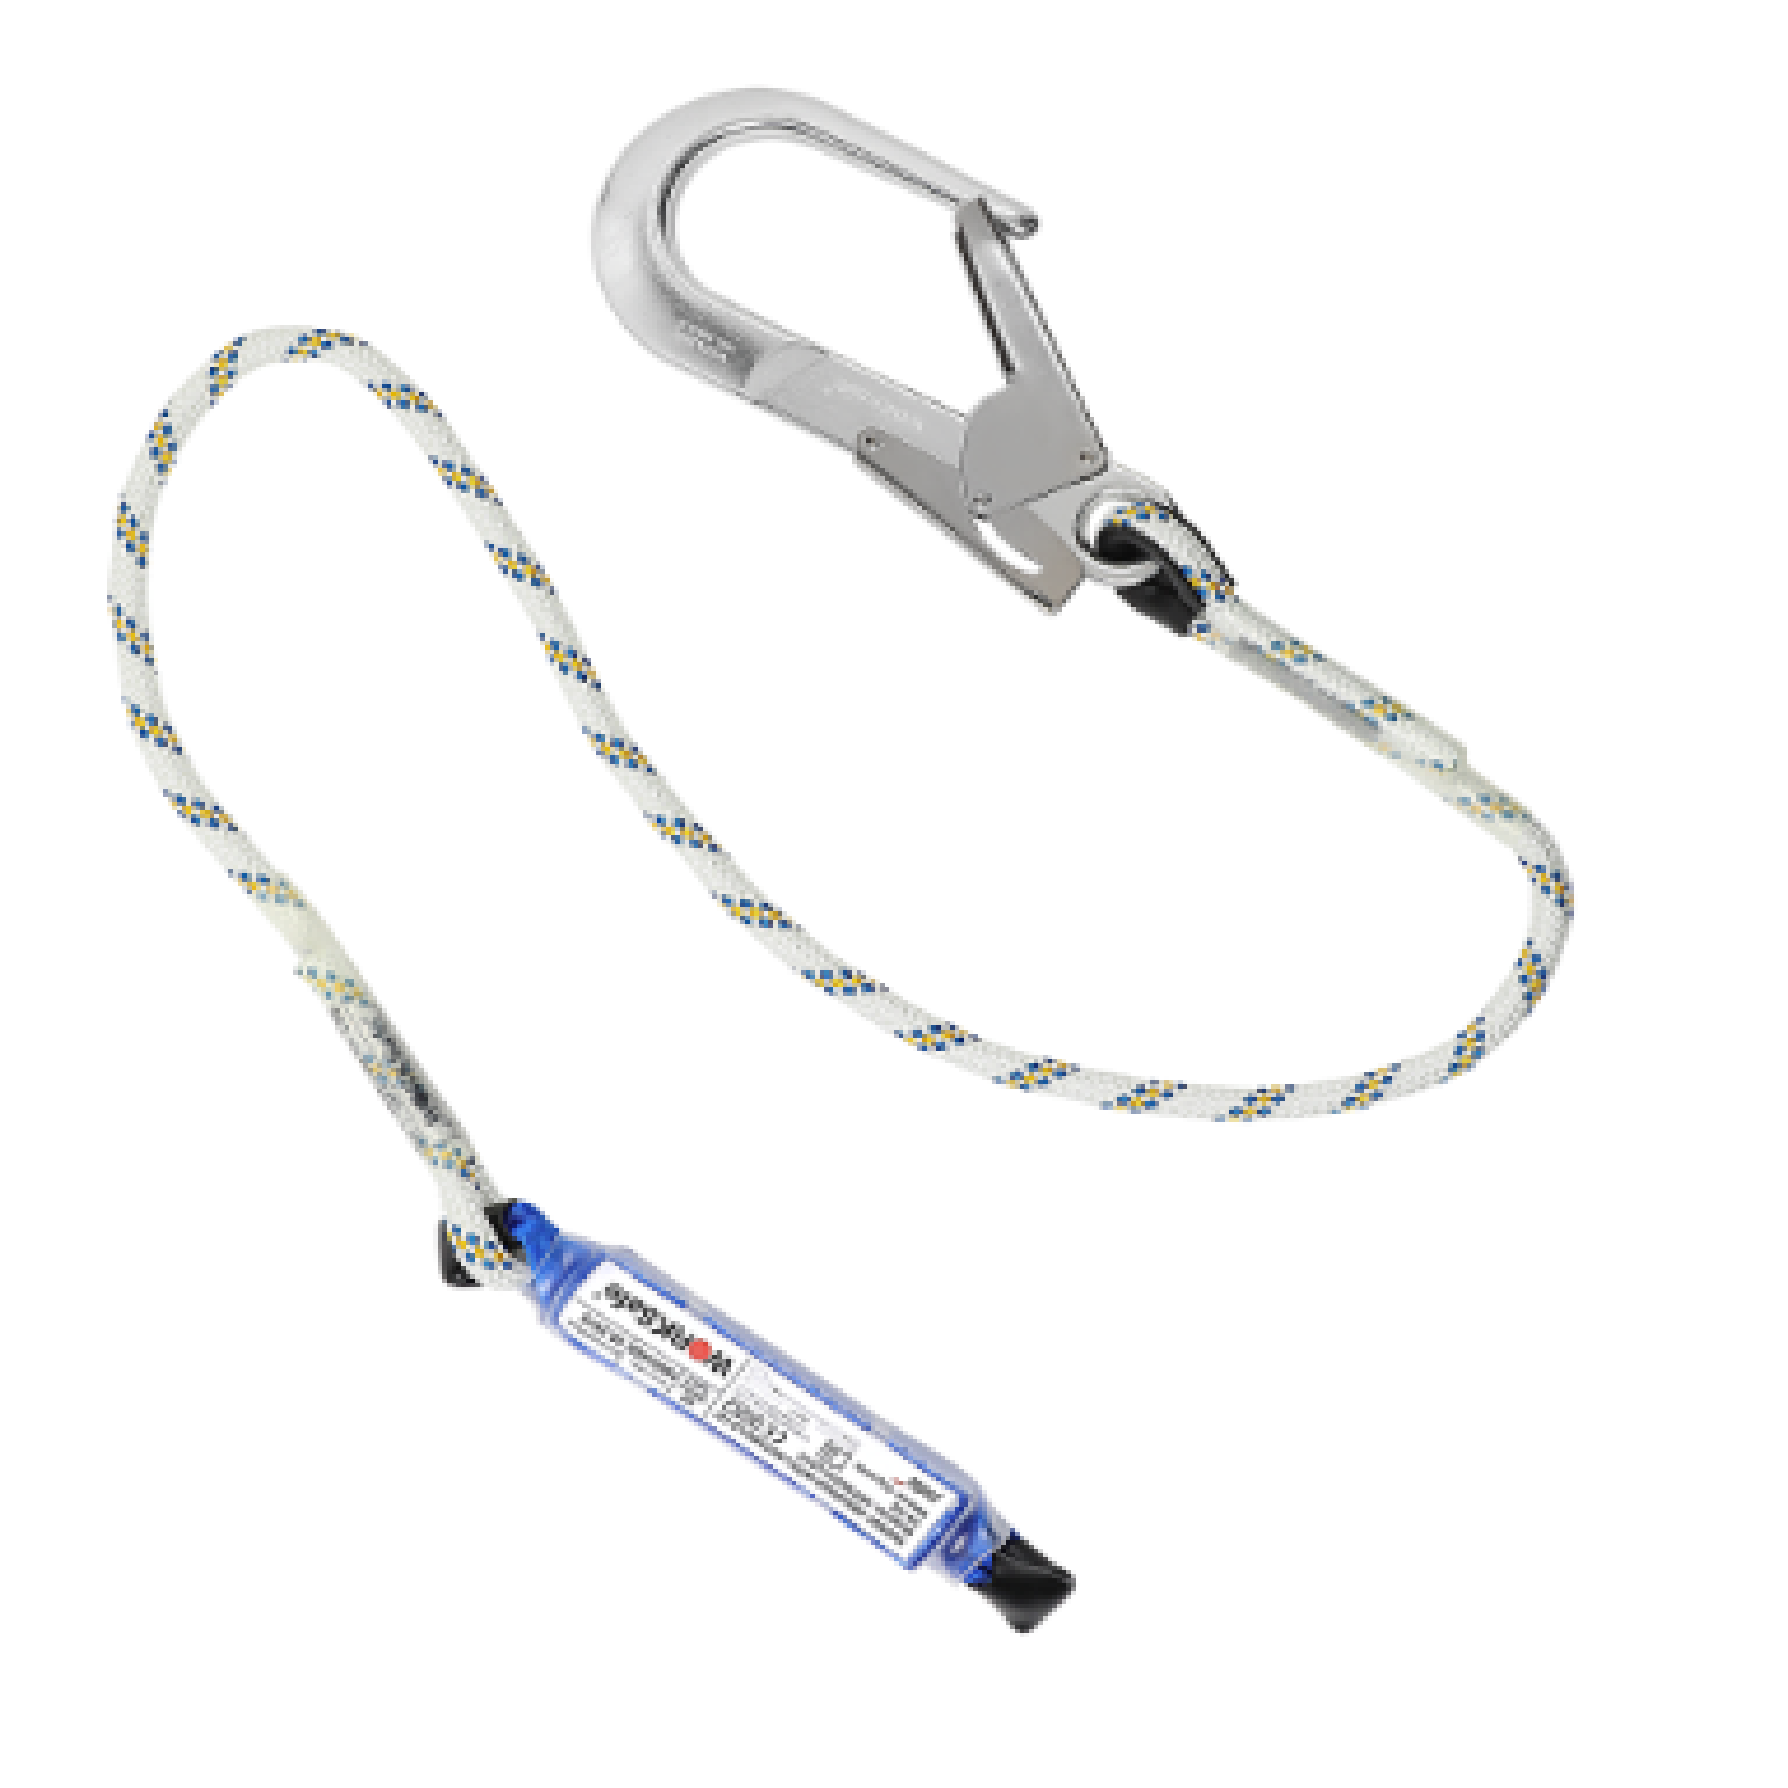 Worksafe WSFBW200+LB121 ENERGY ABSORBER Single Rope Safety Lanyard